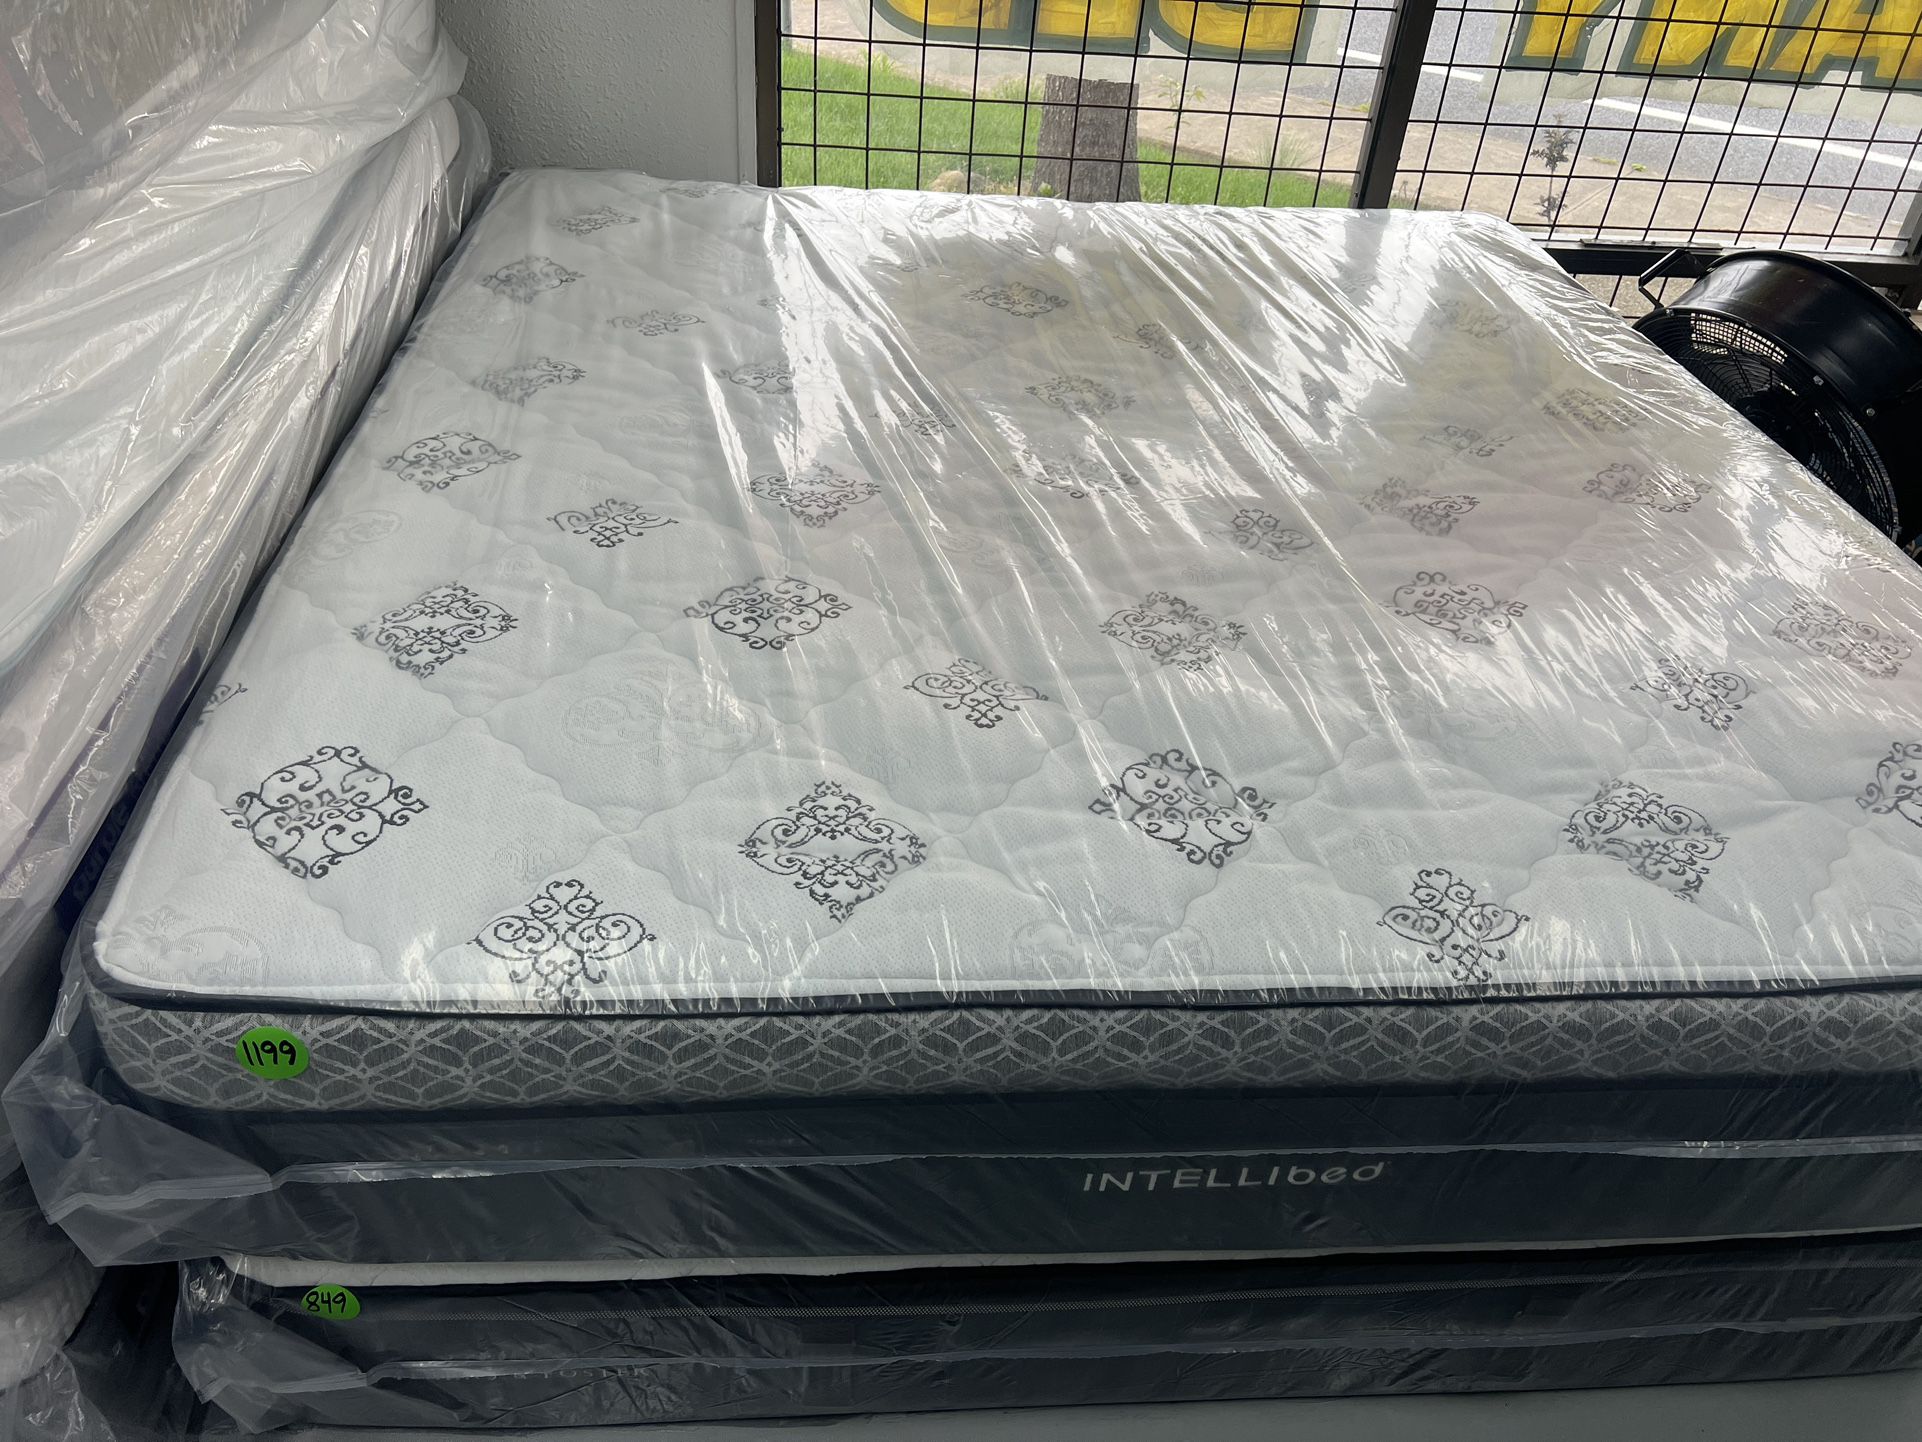 KING SIZE INTELLIBED “MIDNIGHT” MATTRESS & BOX SPRINGS BED SET